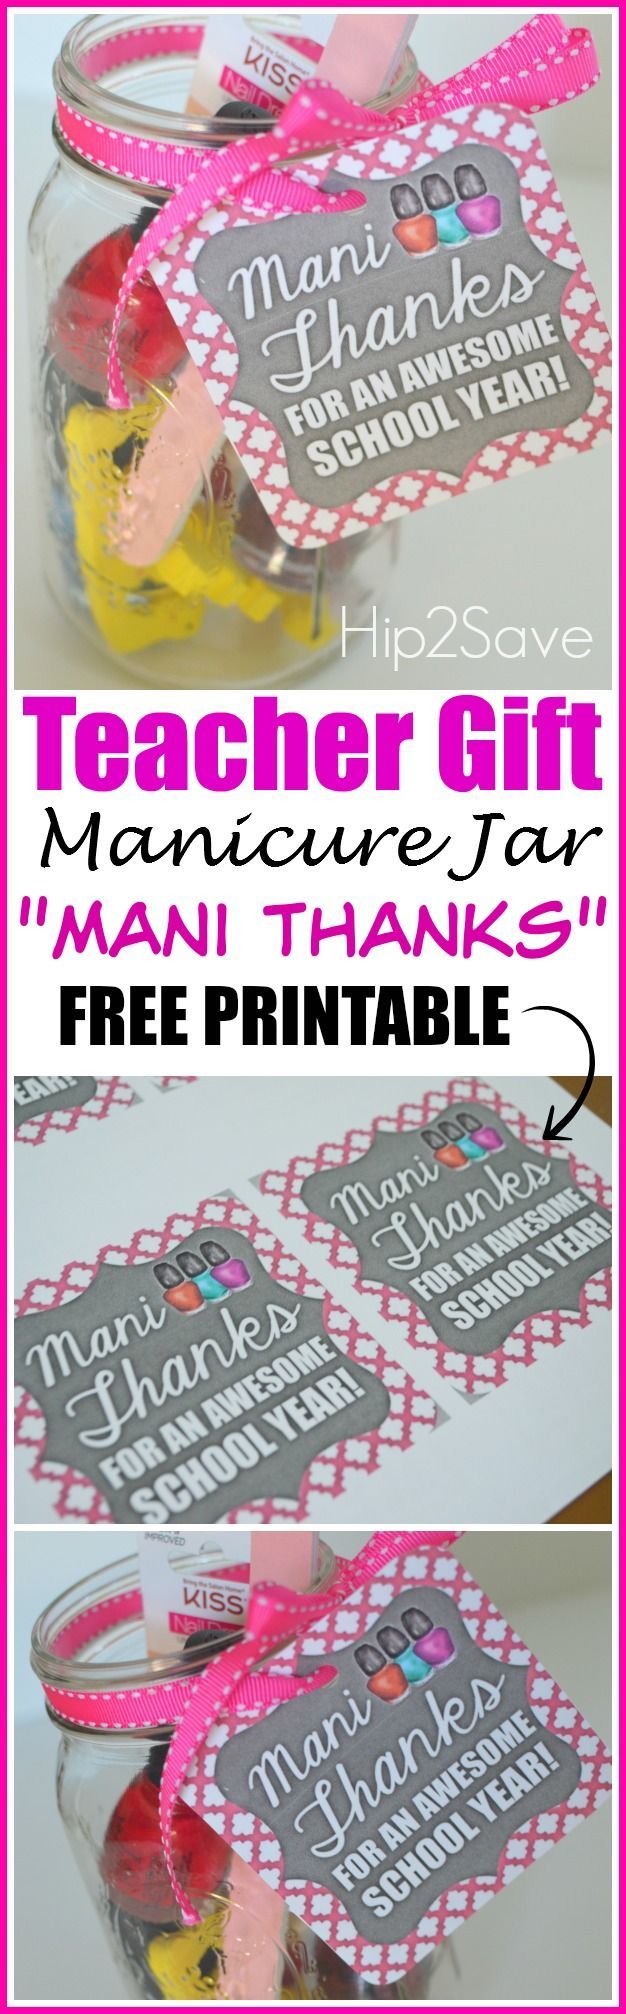 Good teachers are hard to find. Show them your appreciation by giving them this ...